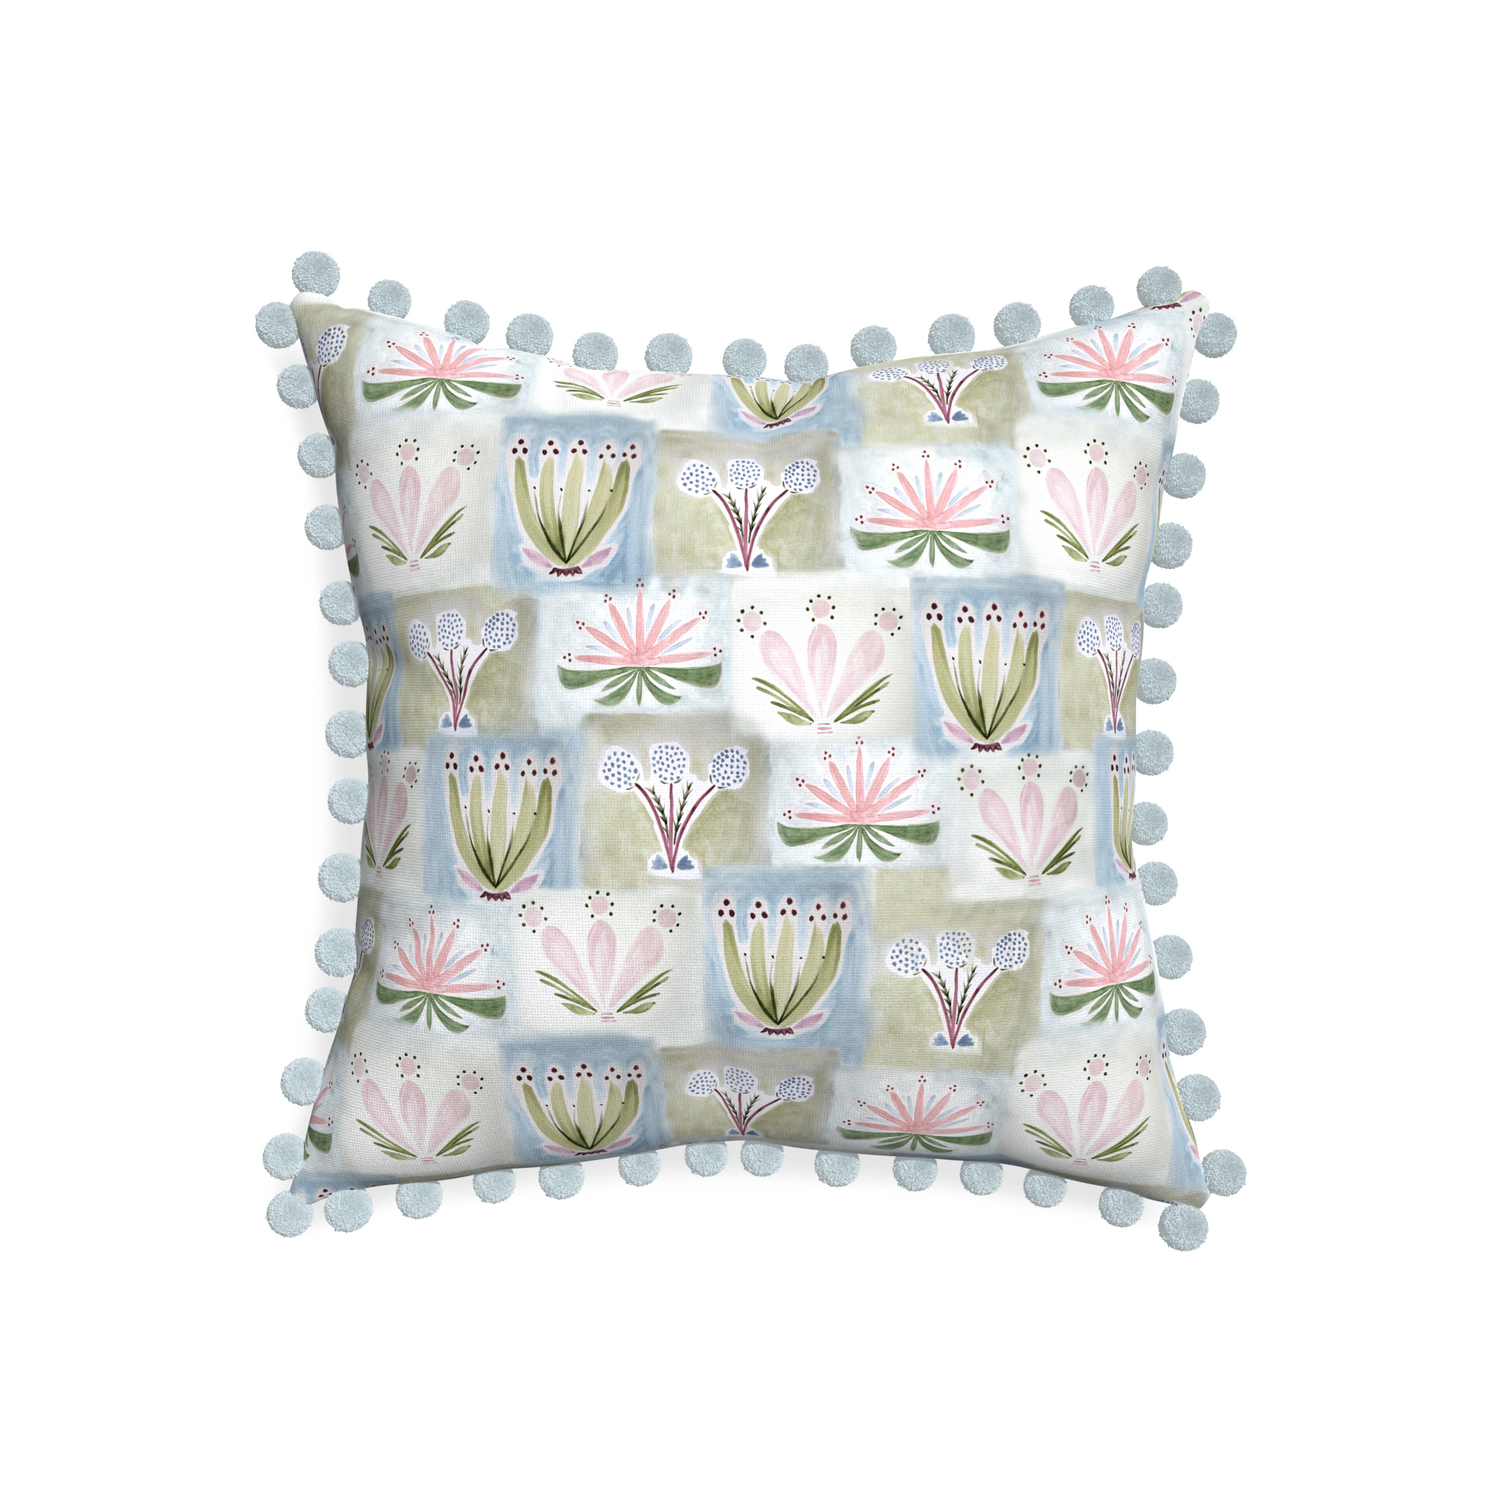 20-square harper custom hand-painted floralpillow with powder pom pom on white background